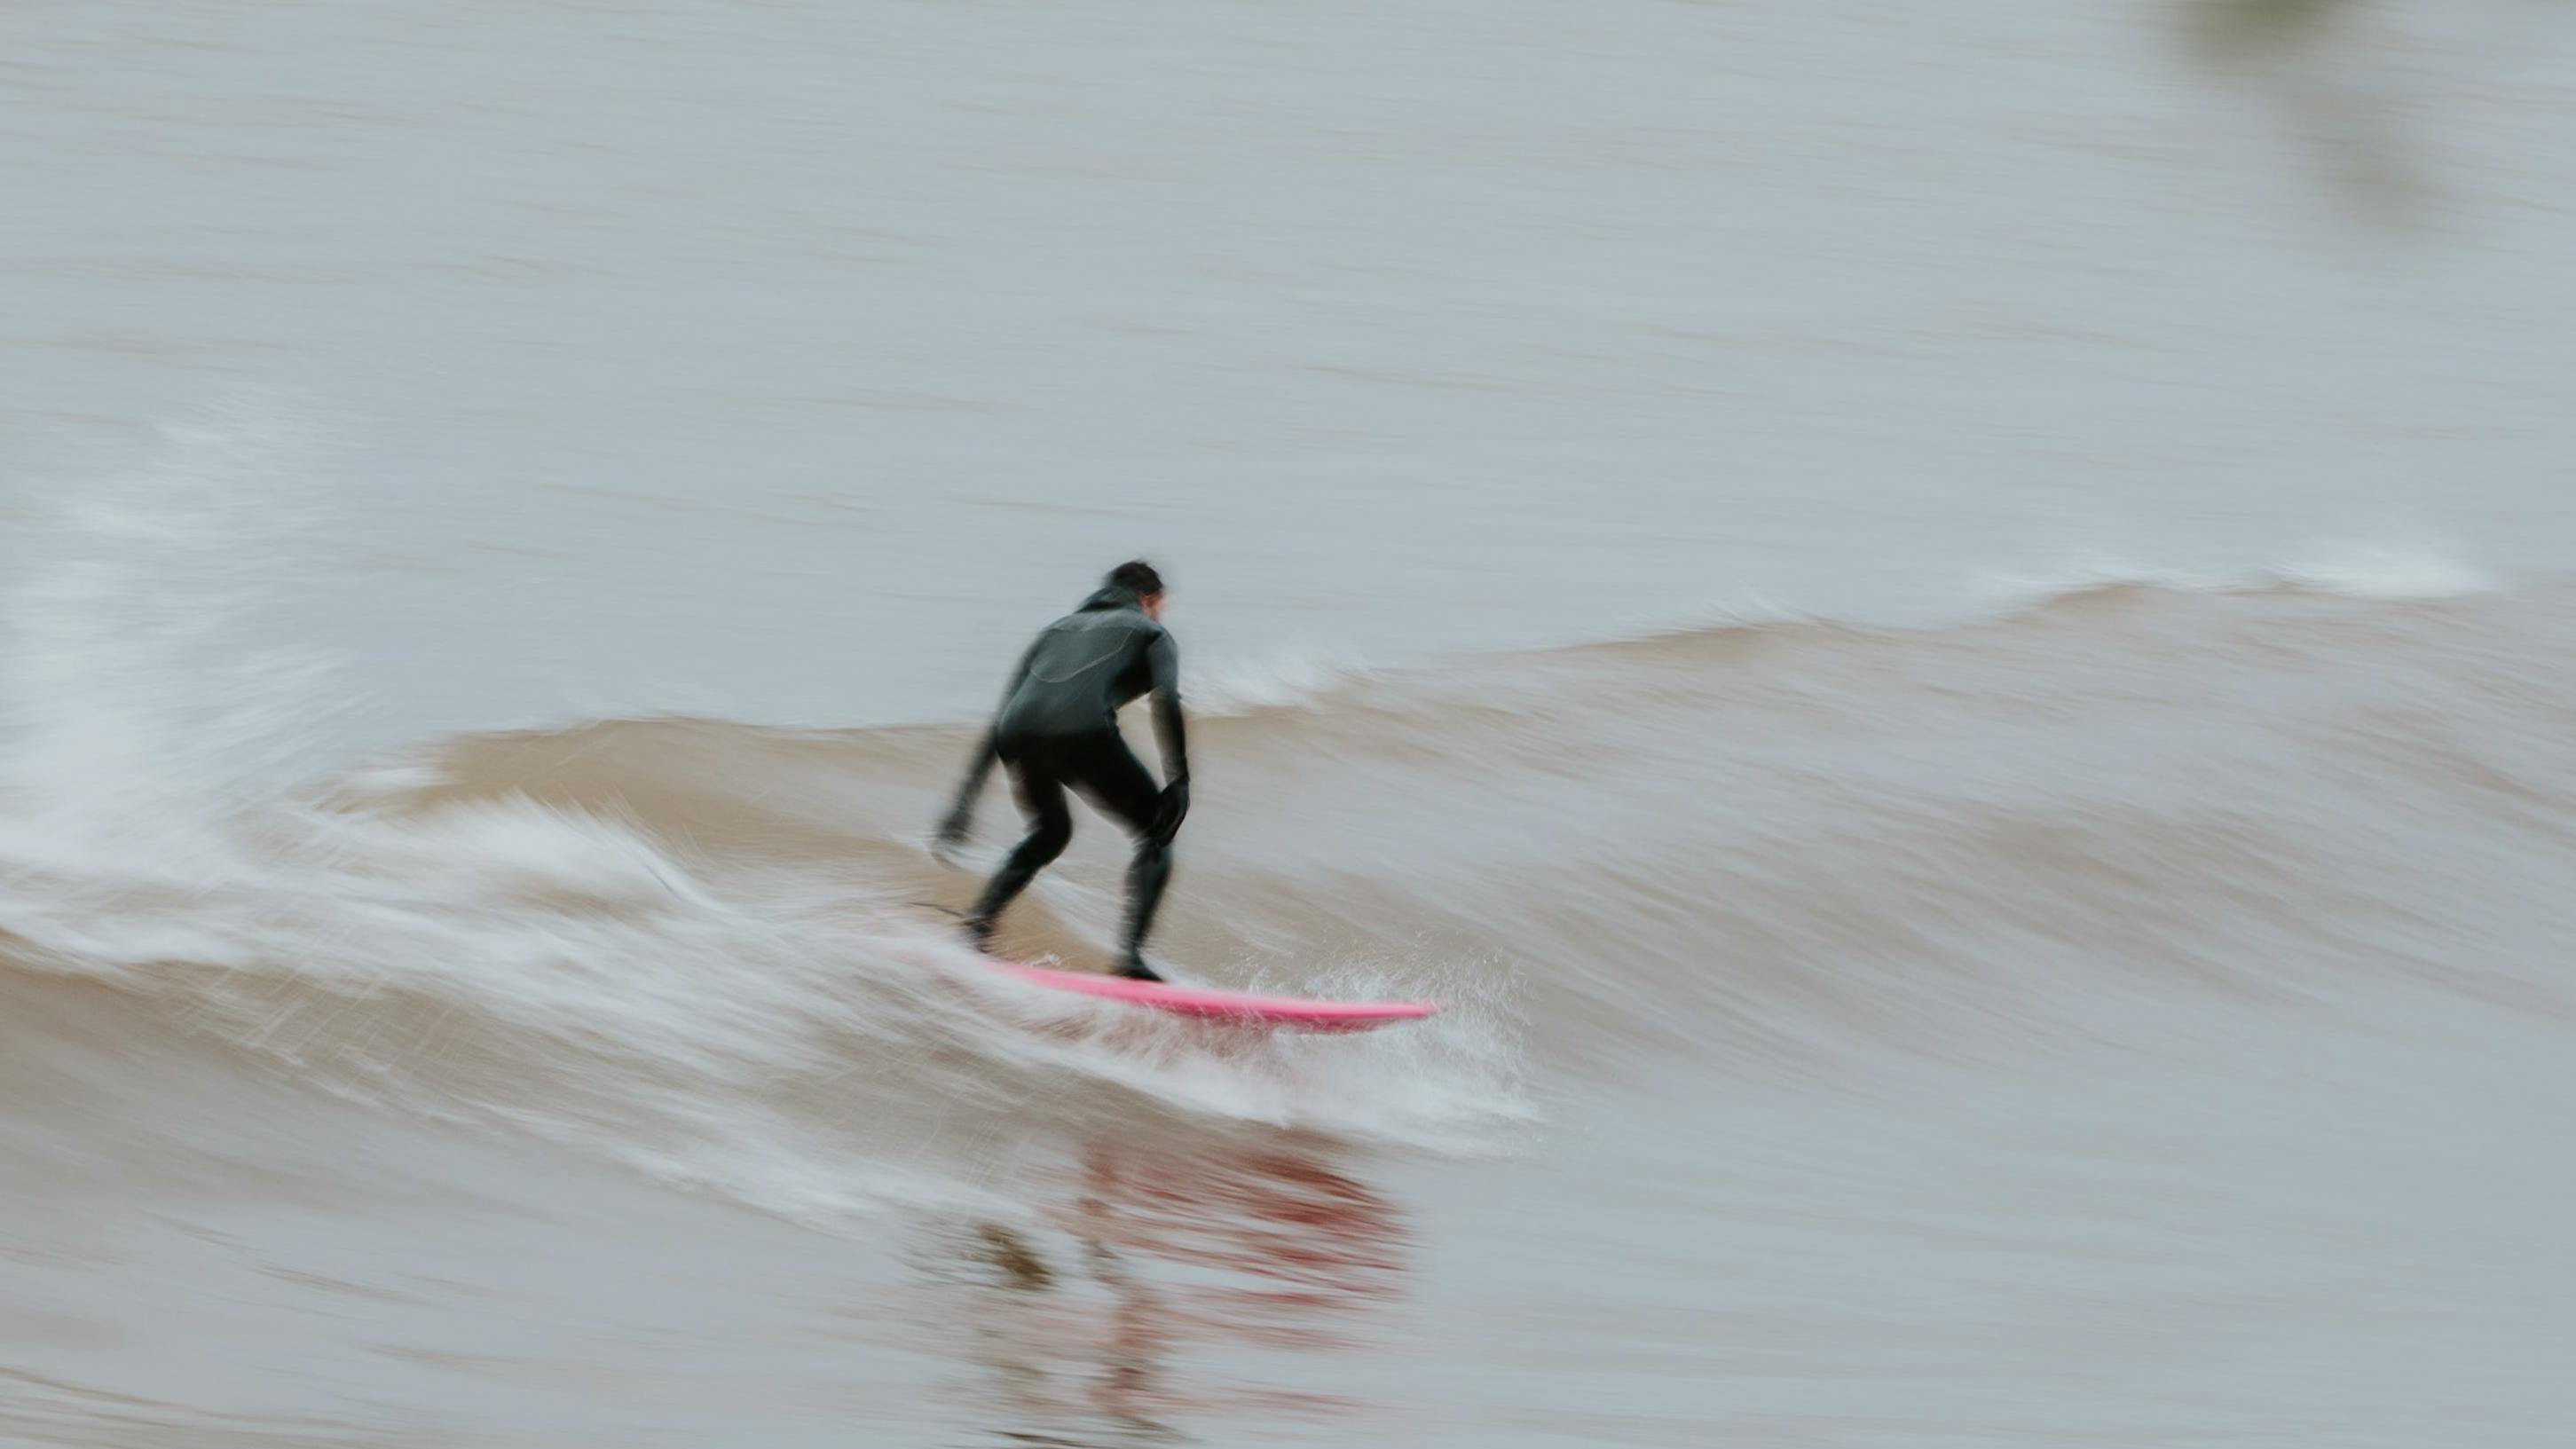 Surfer braving the cold winter conditions before winter arrives for surfing the ski resorts.